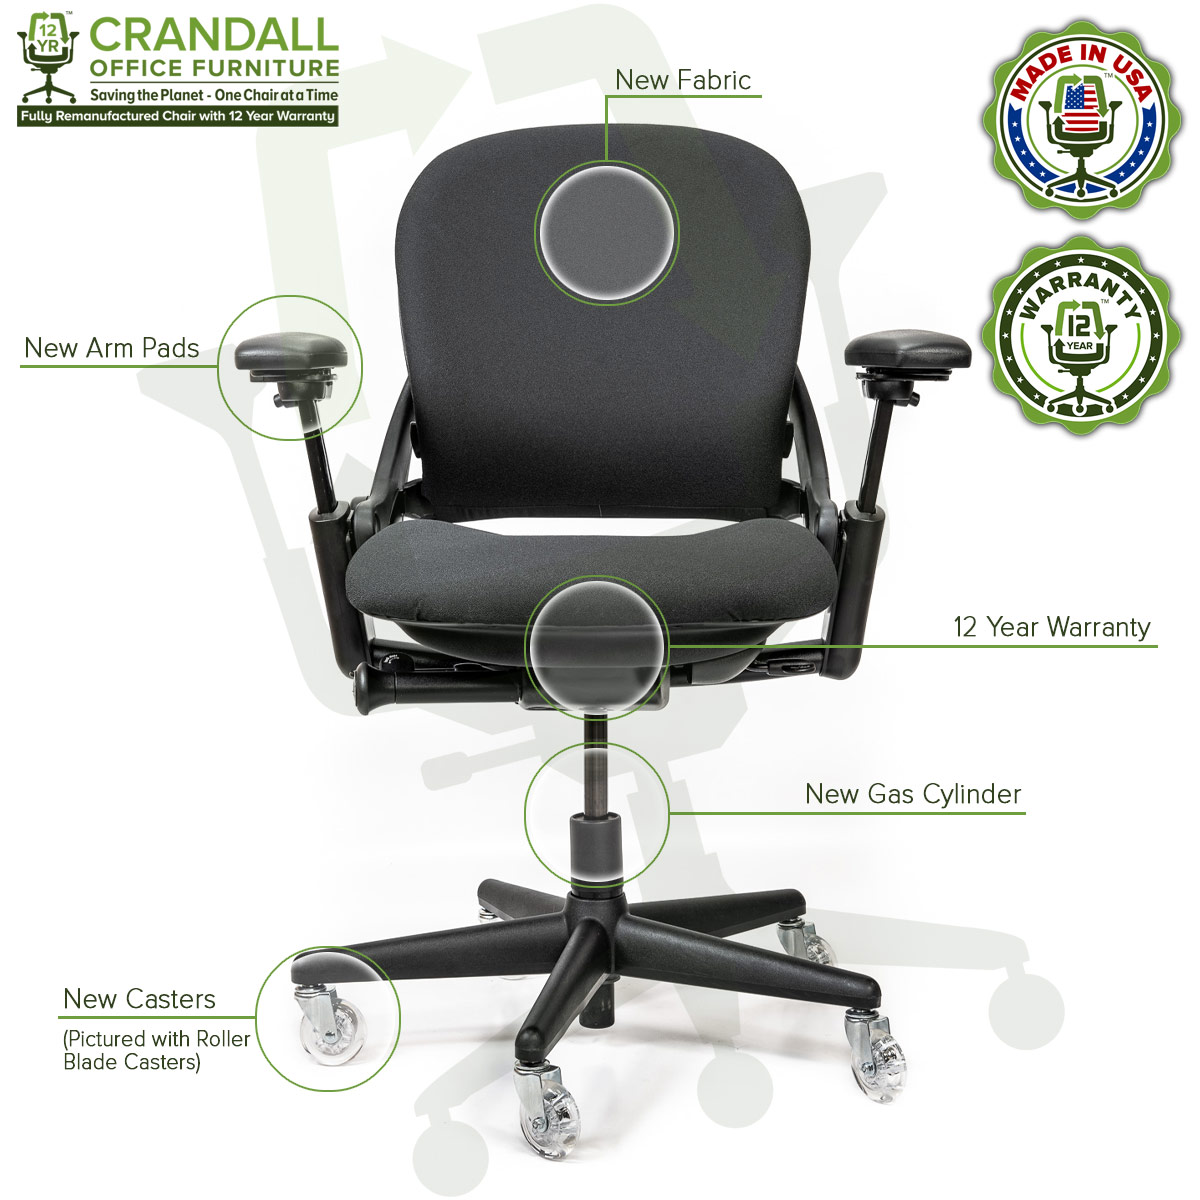 Remanufactured Steelcase 462 Leap V1 Office Chair - Black Frame - Crandall  Office Furniture